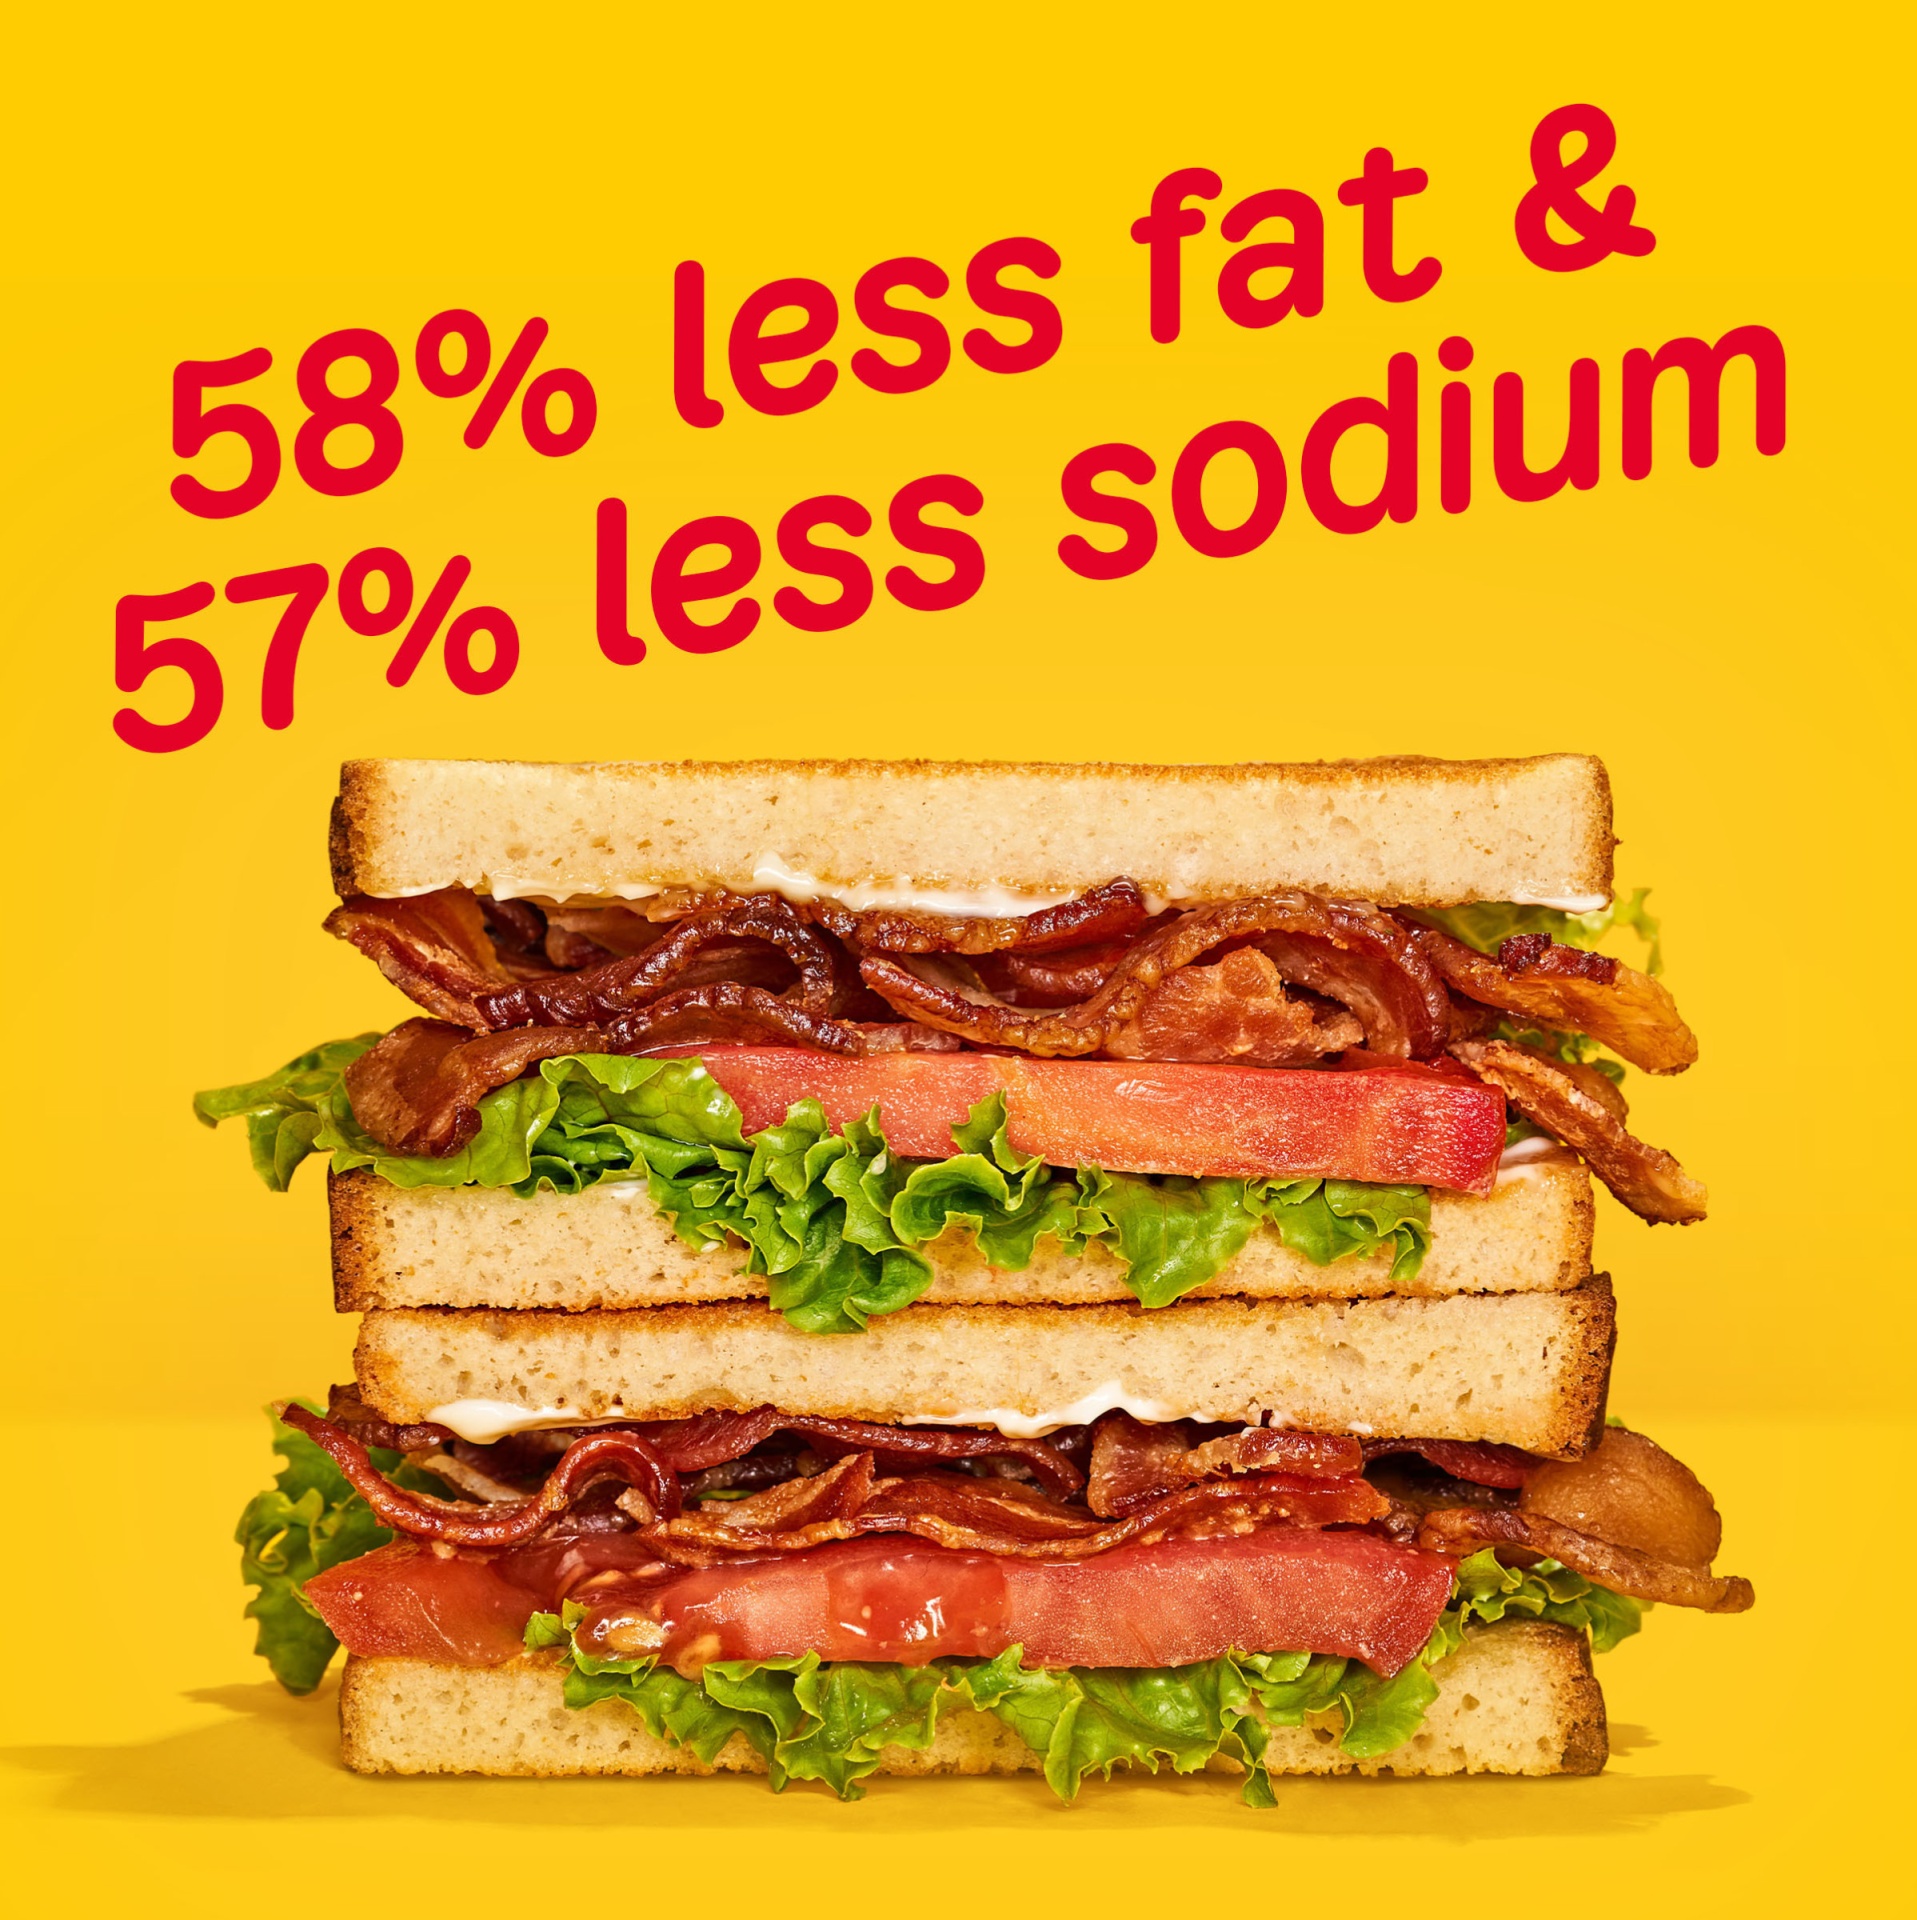 slide 6 of 7, Oscar Mayer Fully Cooked & Gluten Free Turkey Bacon with 58% Less Fat & 57% Less Sodium Pack, 21-23 slices, 12 oz